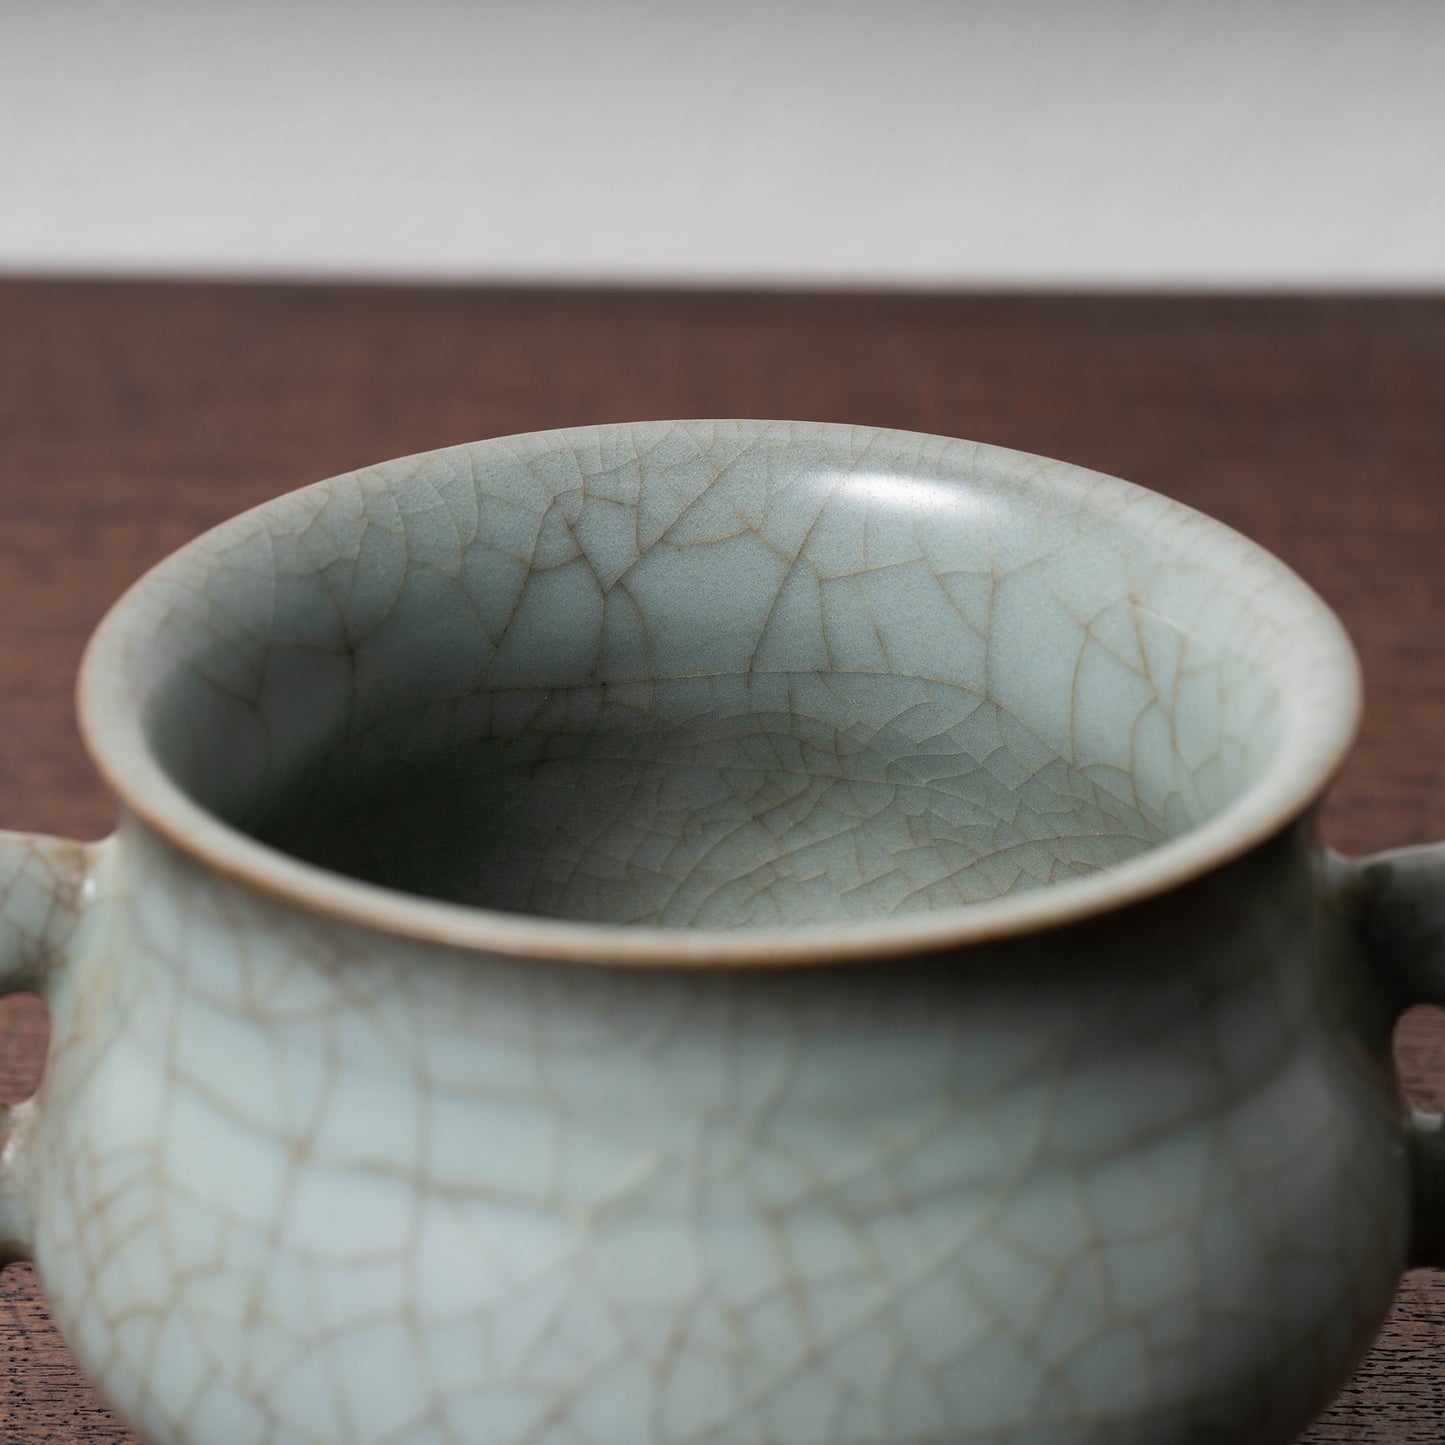 Southern Song Dynasty Guan ware Celadon Censer with Fish Handle